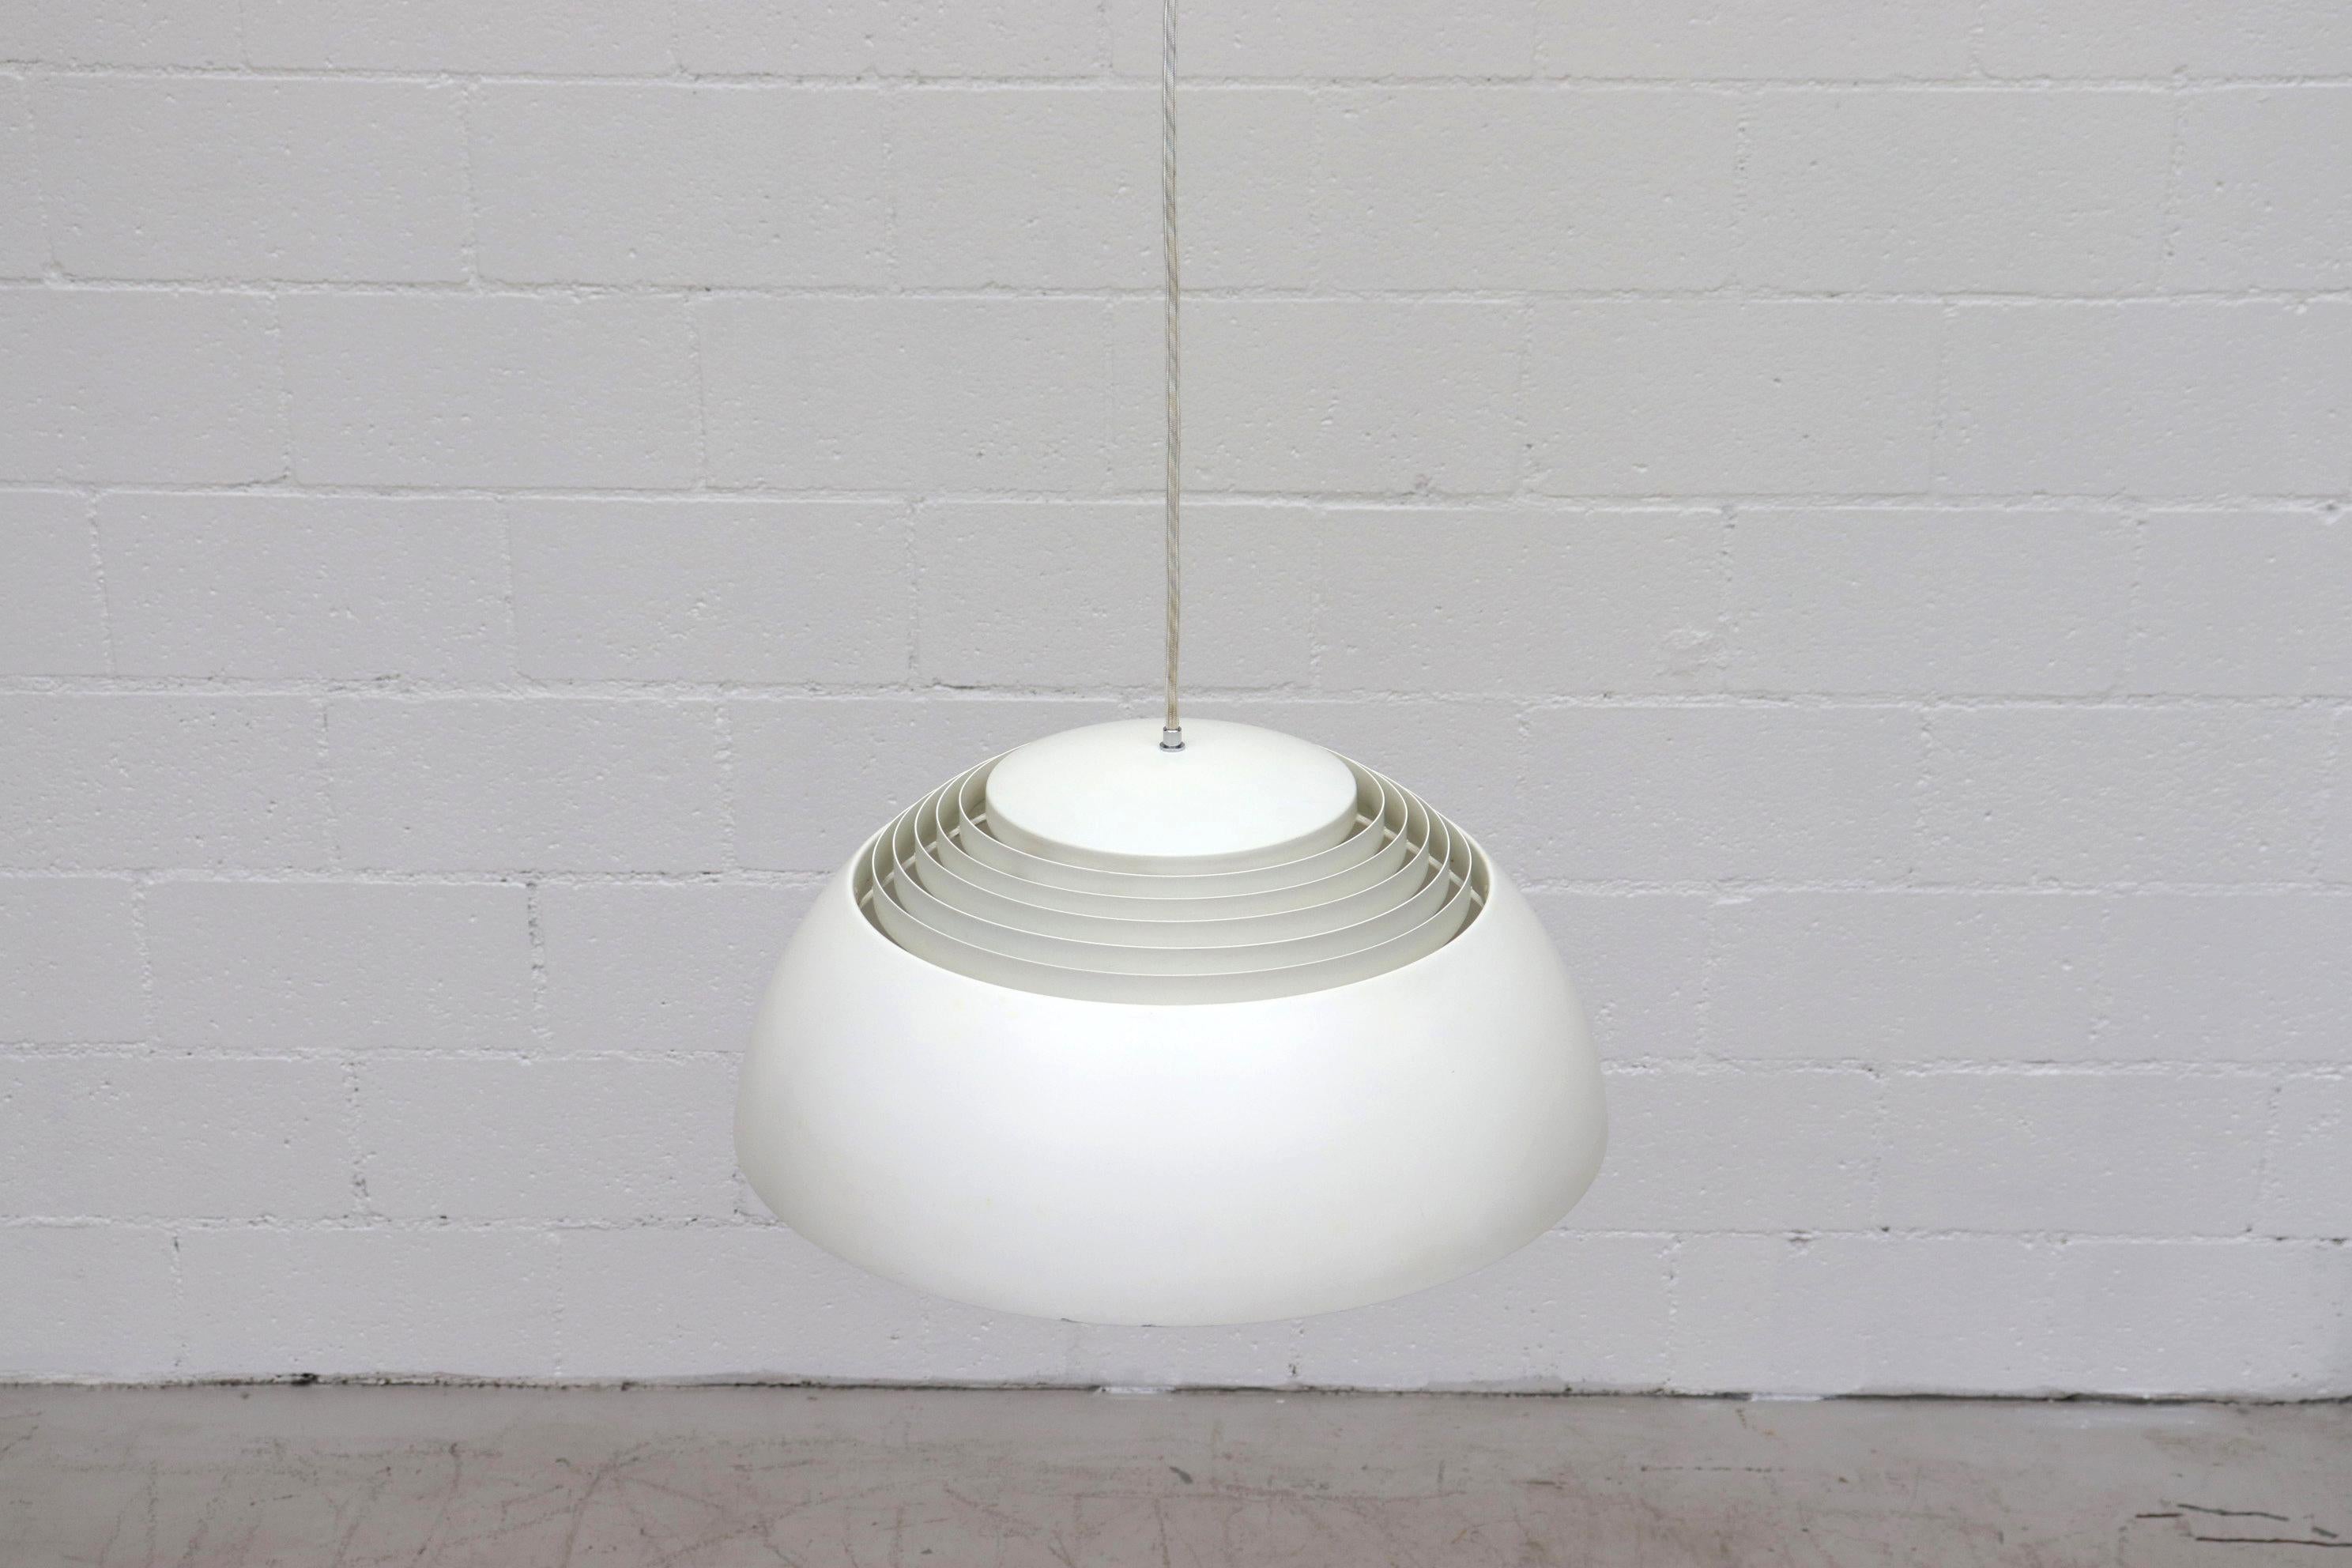 Large White Enameled Metal Vented Dome Light with Inner Trumpet Shaped Diffuser and a Cloth Covered Light Cord. A.J. Royal Pendant Lamp by Arne Jacobsen for Louis Poulsen, Danish Design 1957. In Original Condition with Wear Consistent with Age.